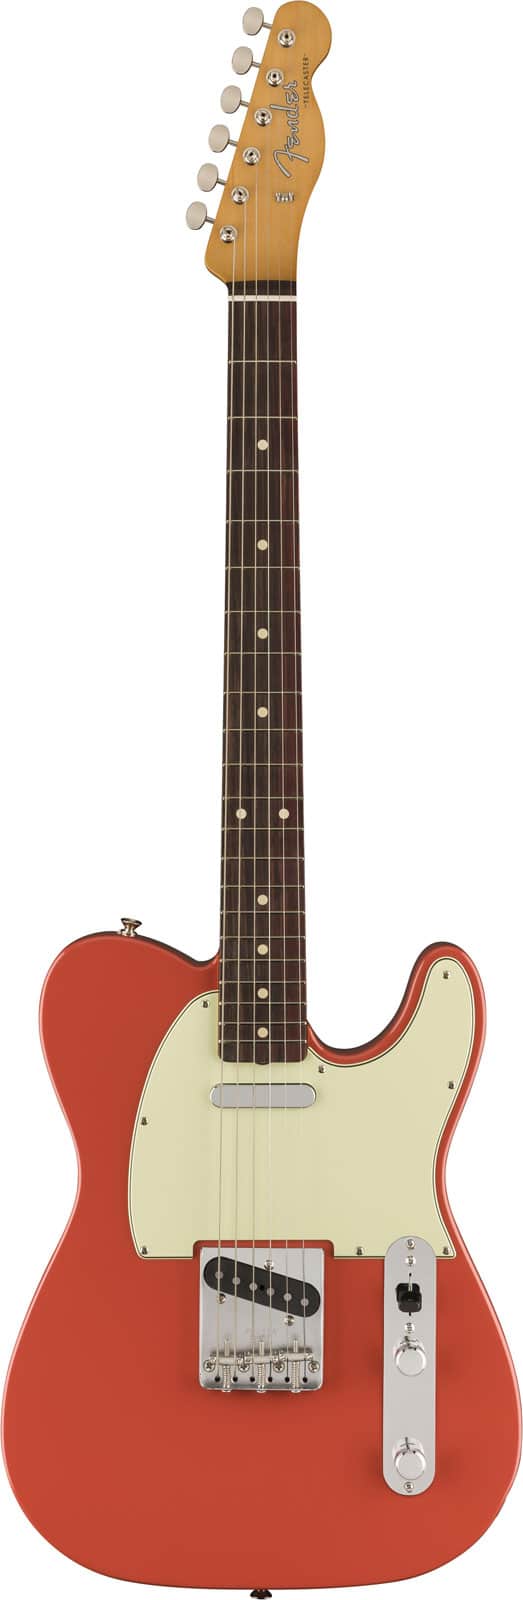 FENDER MEXICAN VINTERA II 60S TELECASTER RW FIESTA RED - RECONDITIONNE